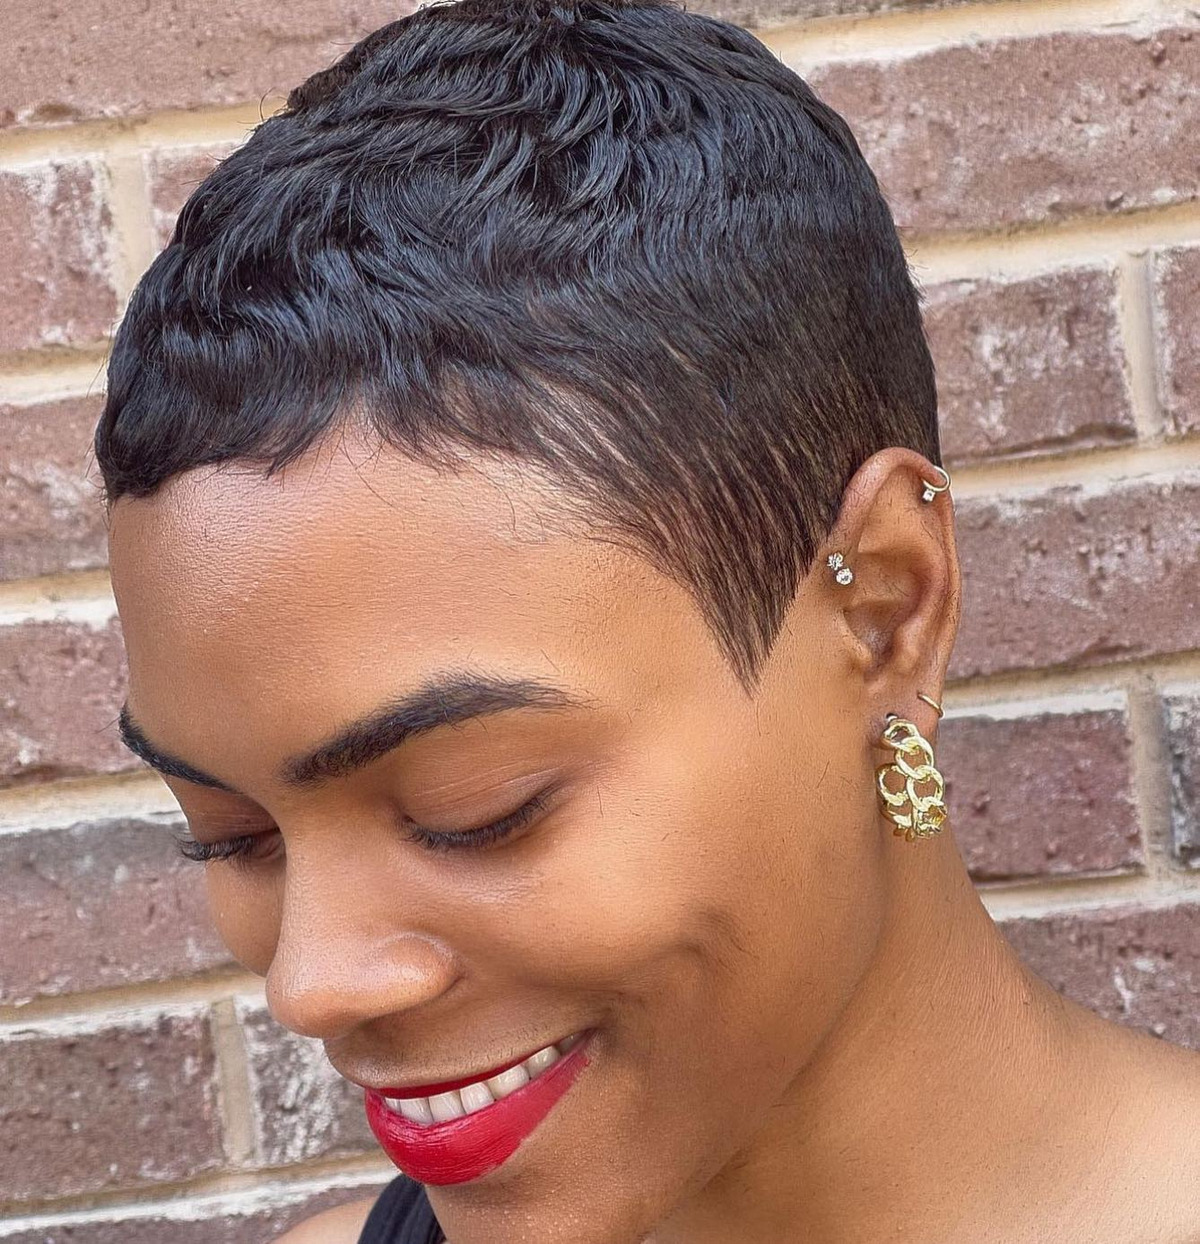 Layer Pixie Cut With Very Short Bangs